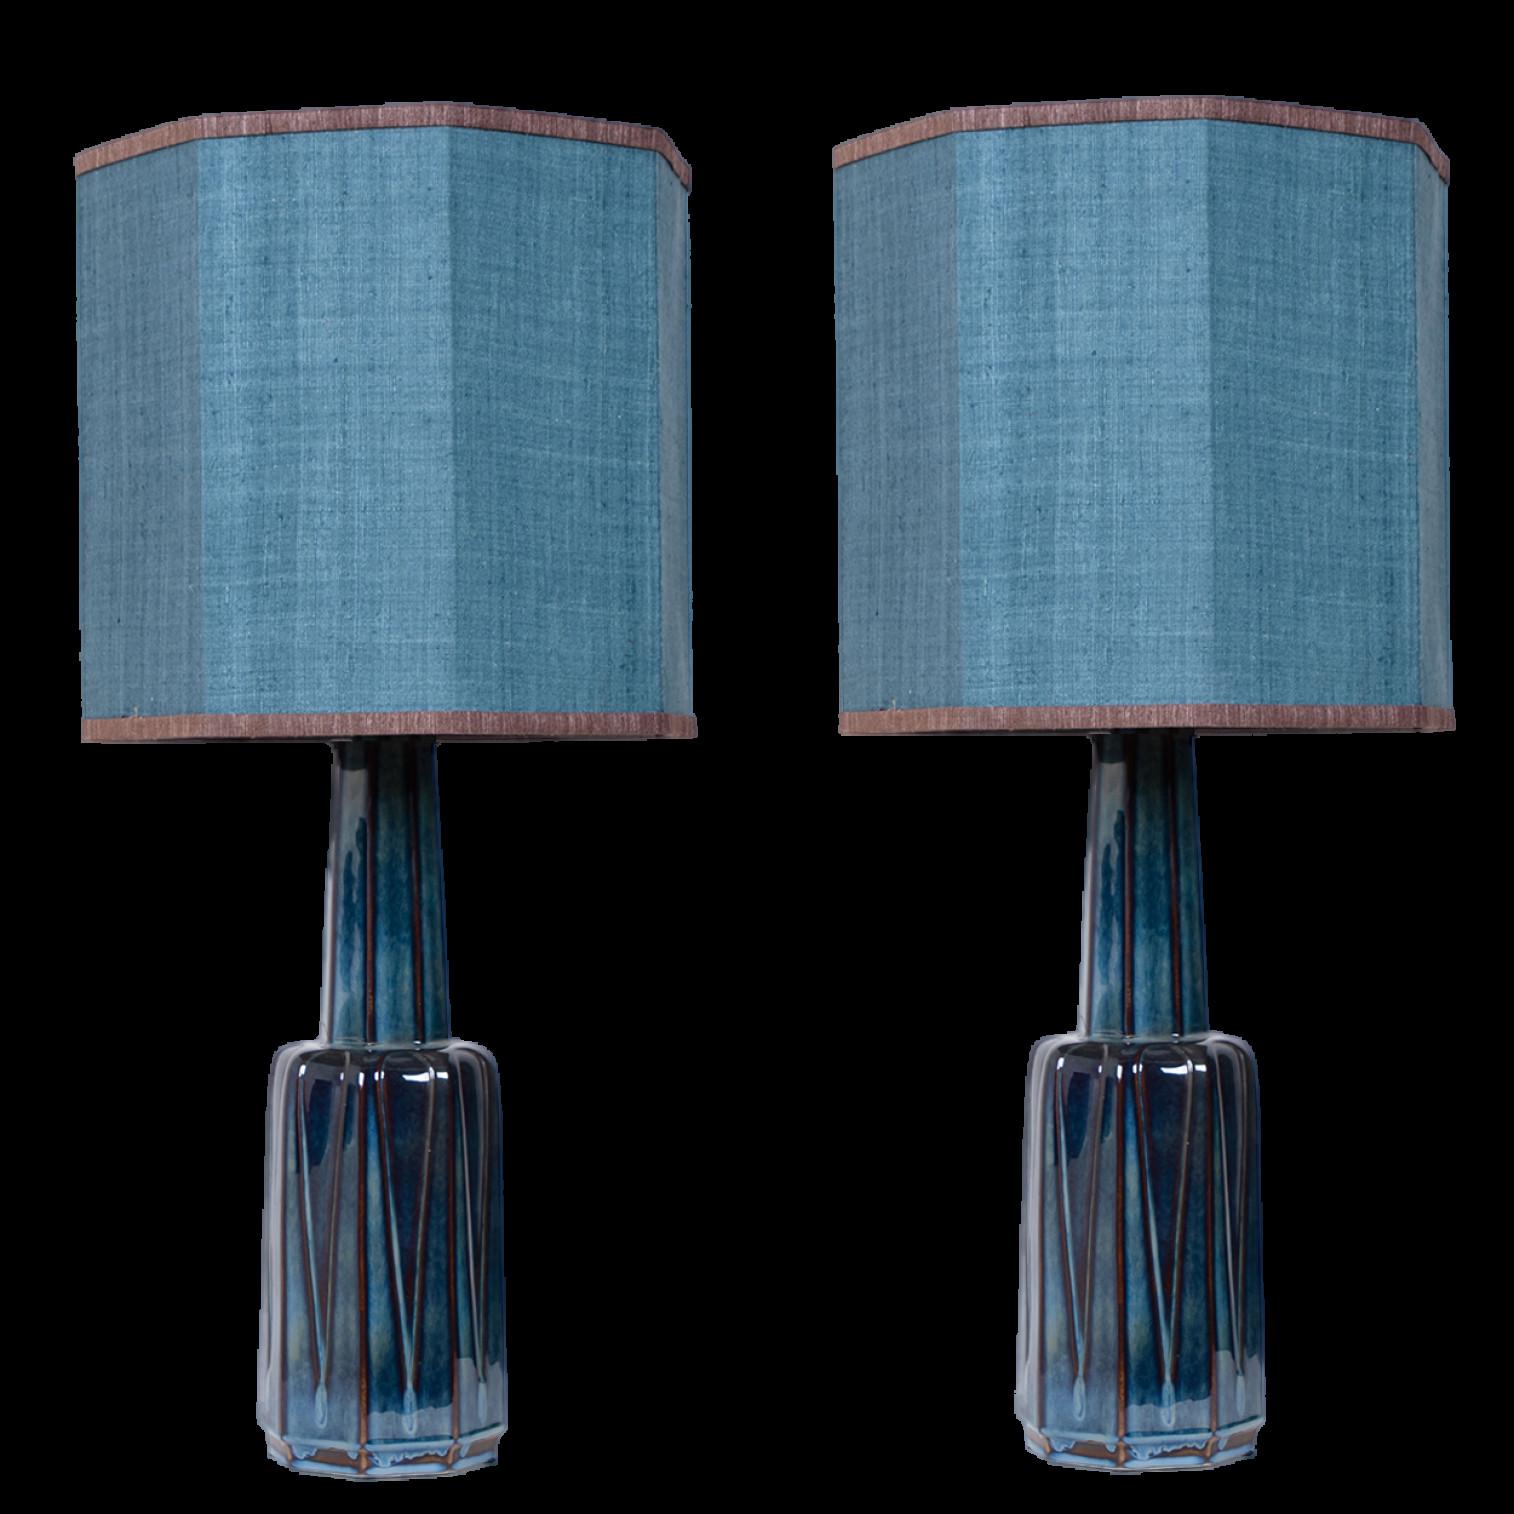 1 of the 2 Ceramic large table lamps by Soholm, Denmark, 1960s. This high-end sculptural piece is handmade ceramic in blue or grey tones, with a combination of dry and glazed finishes. With a new custom made blue silk lamp shade with warm gold or